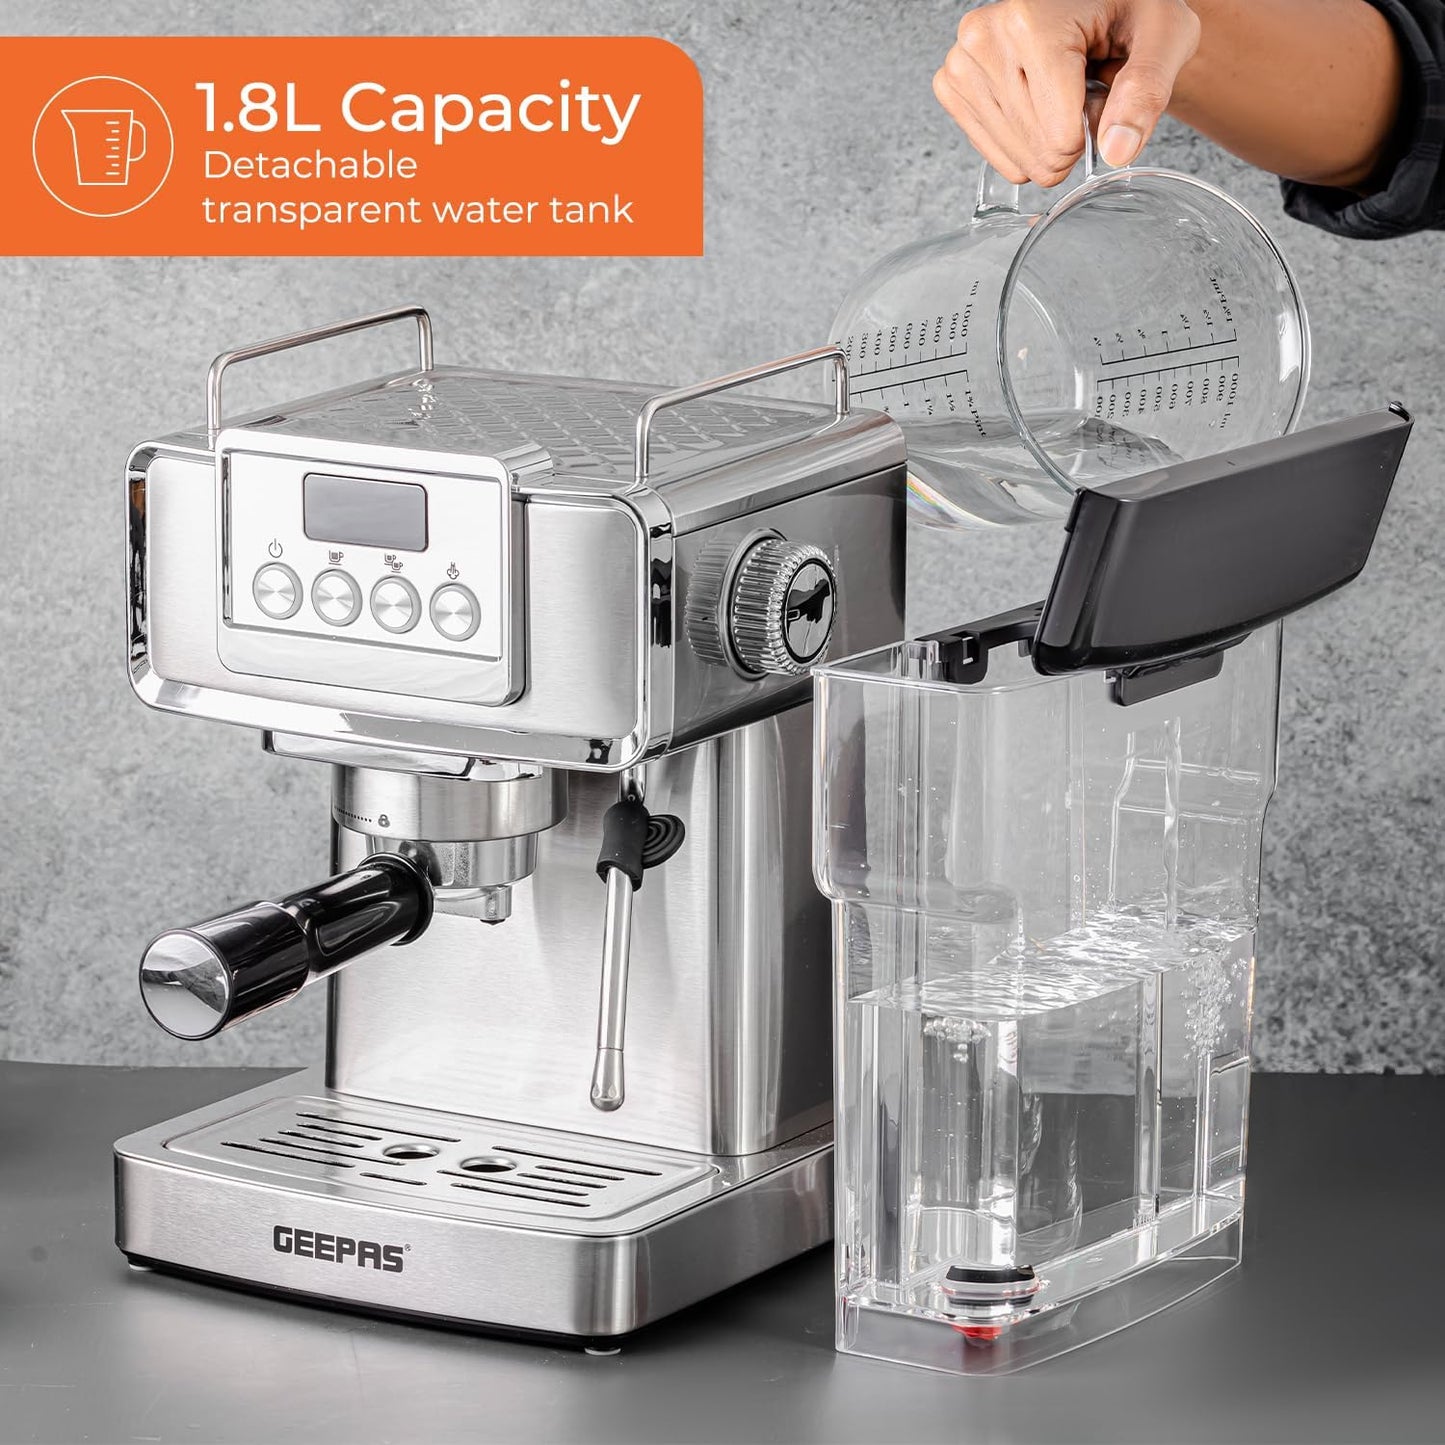 GEEPAS Espresso Coffee Machine with Milk Frother